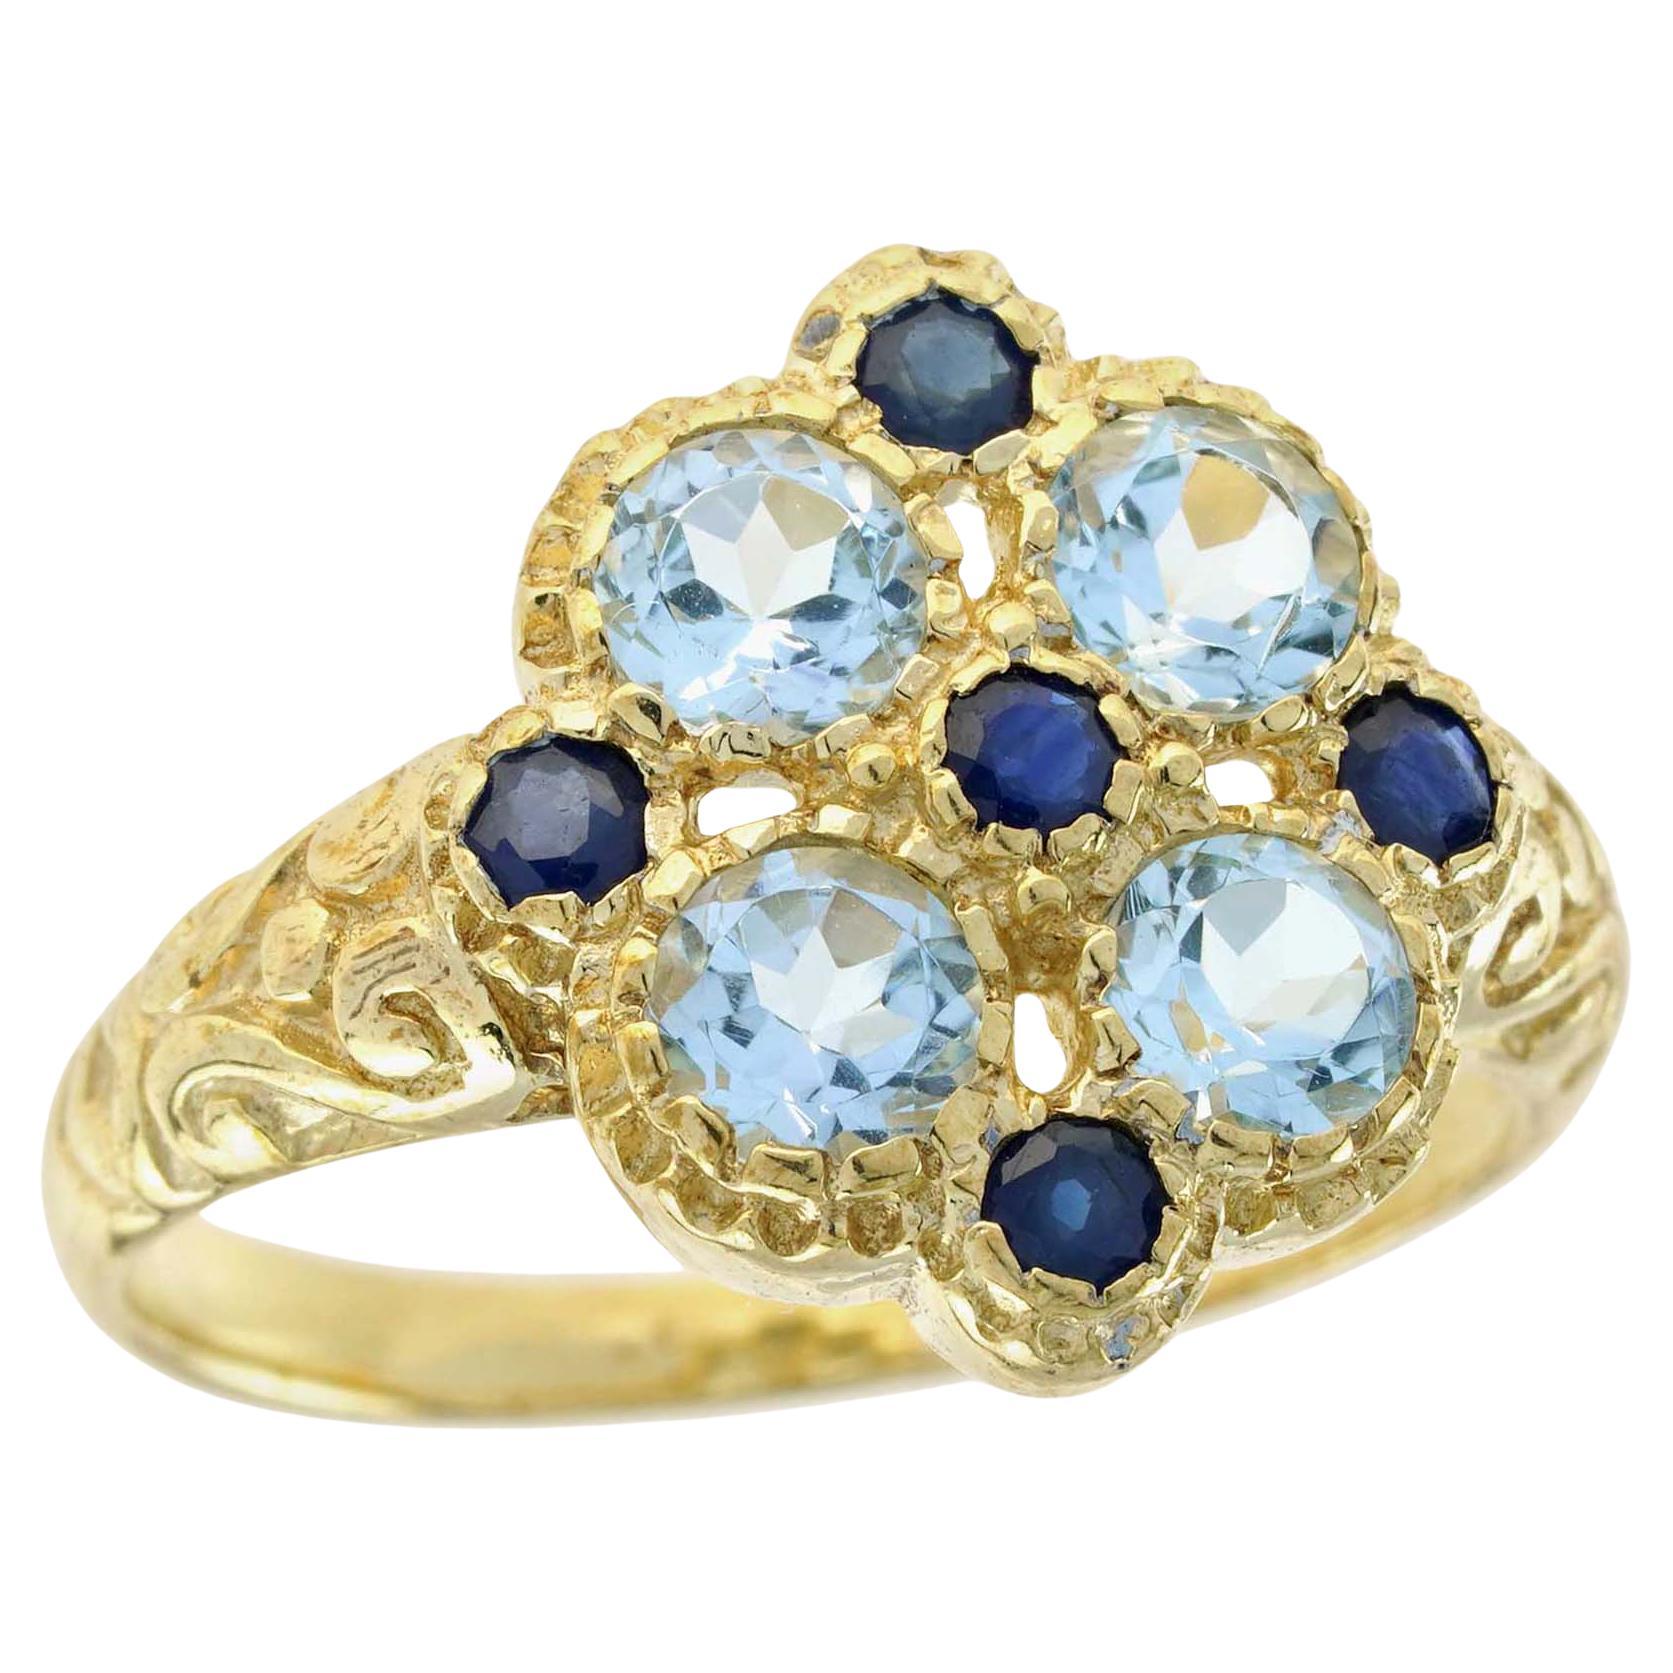 For Sale:  Natural Blue Topaz and Blue Sapphire Vintage Style Cluster Ring in Solid 9K Gold